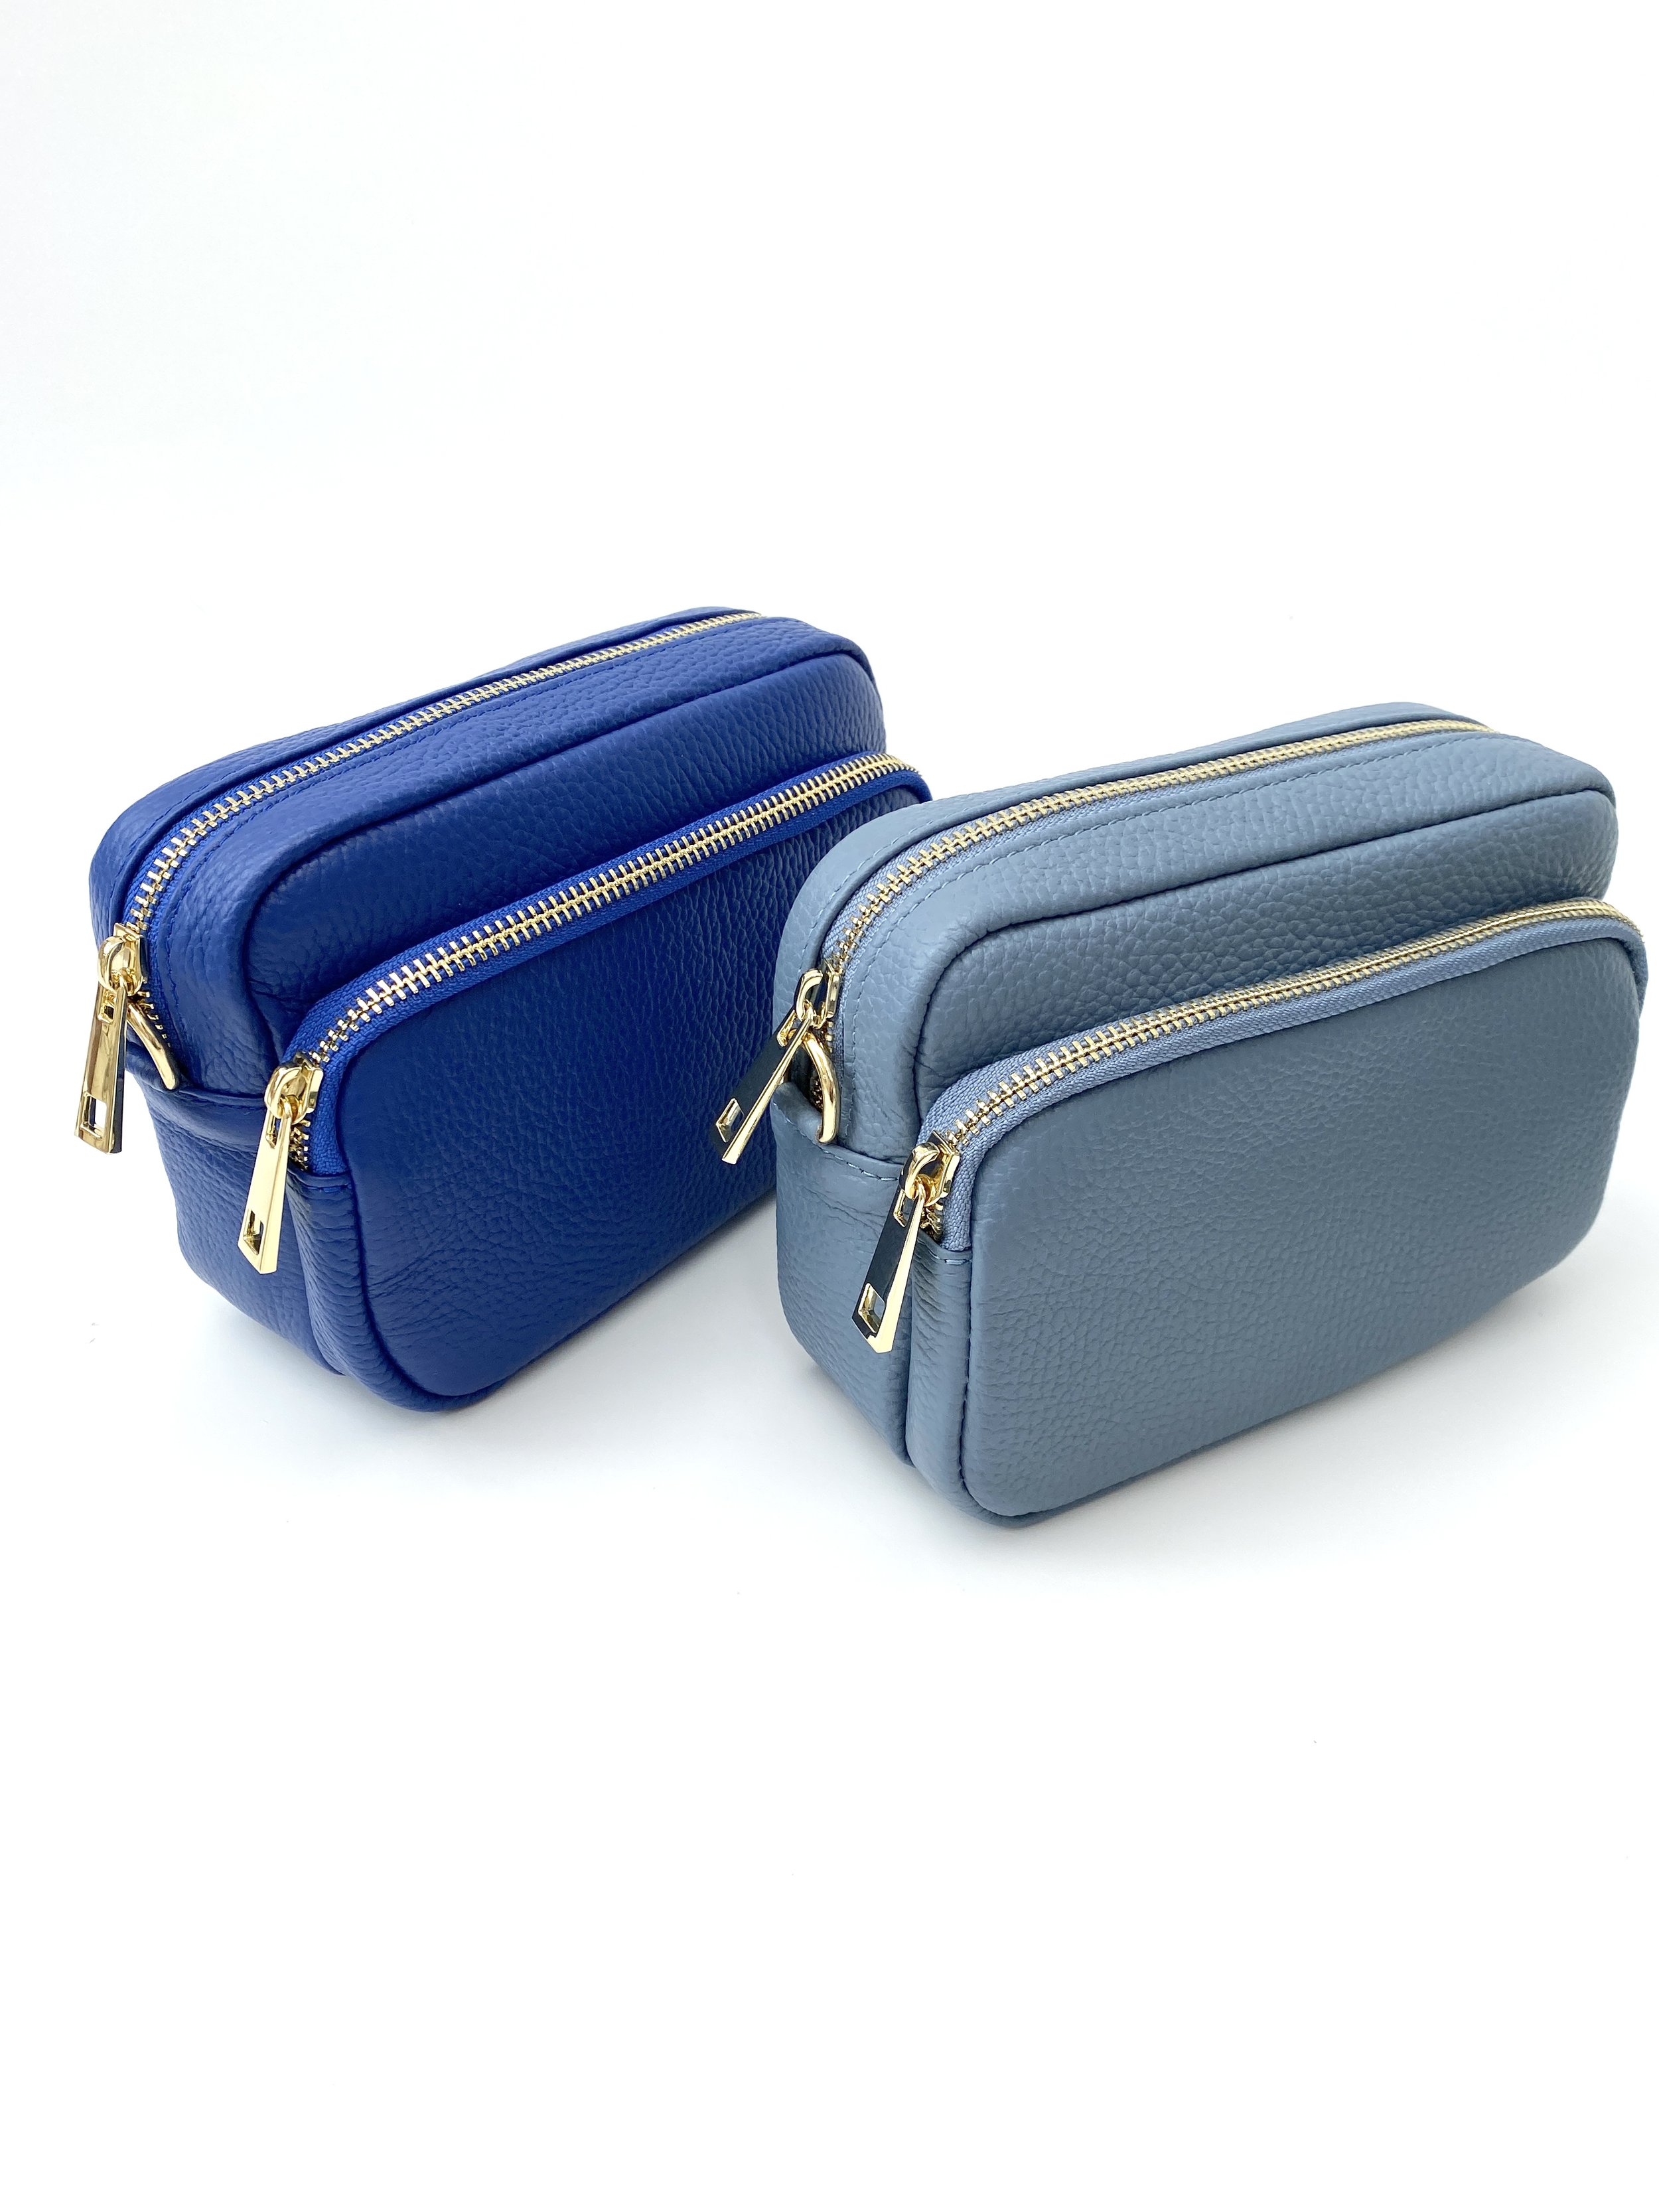 ELVI MAXI: work / office bag in genuine leather, MULTICOLOR blue base, with  shoulder strap, CHIAROSCURO, Made in Italy. | OFFICE BAGS | Emporium Italy